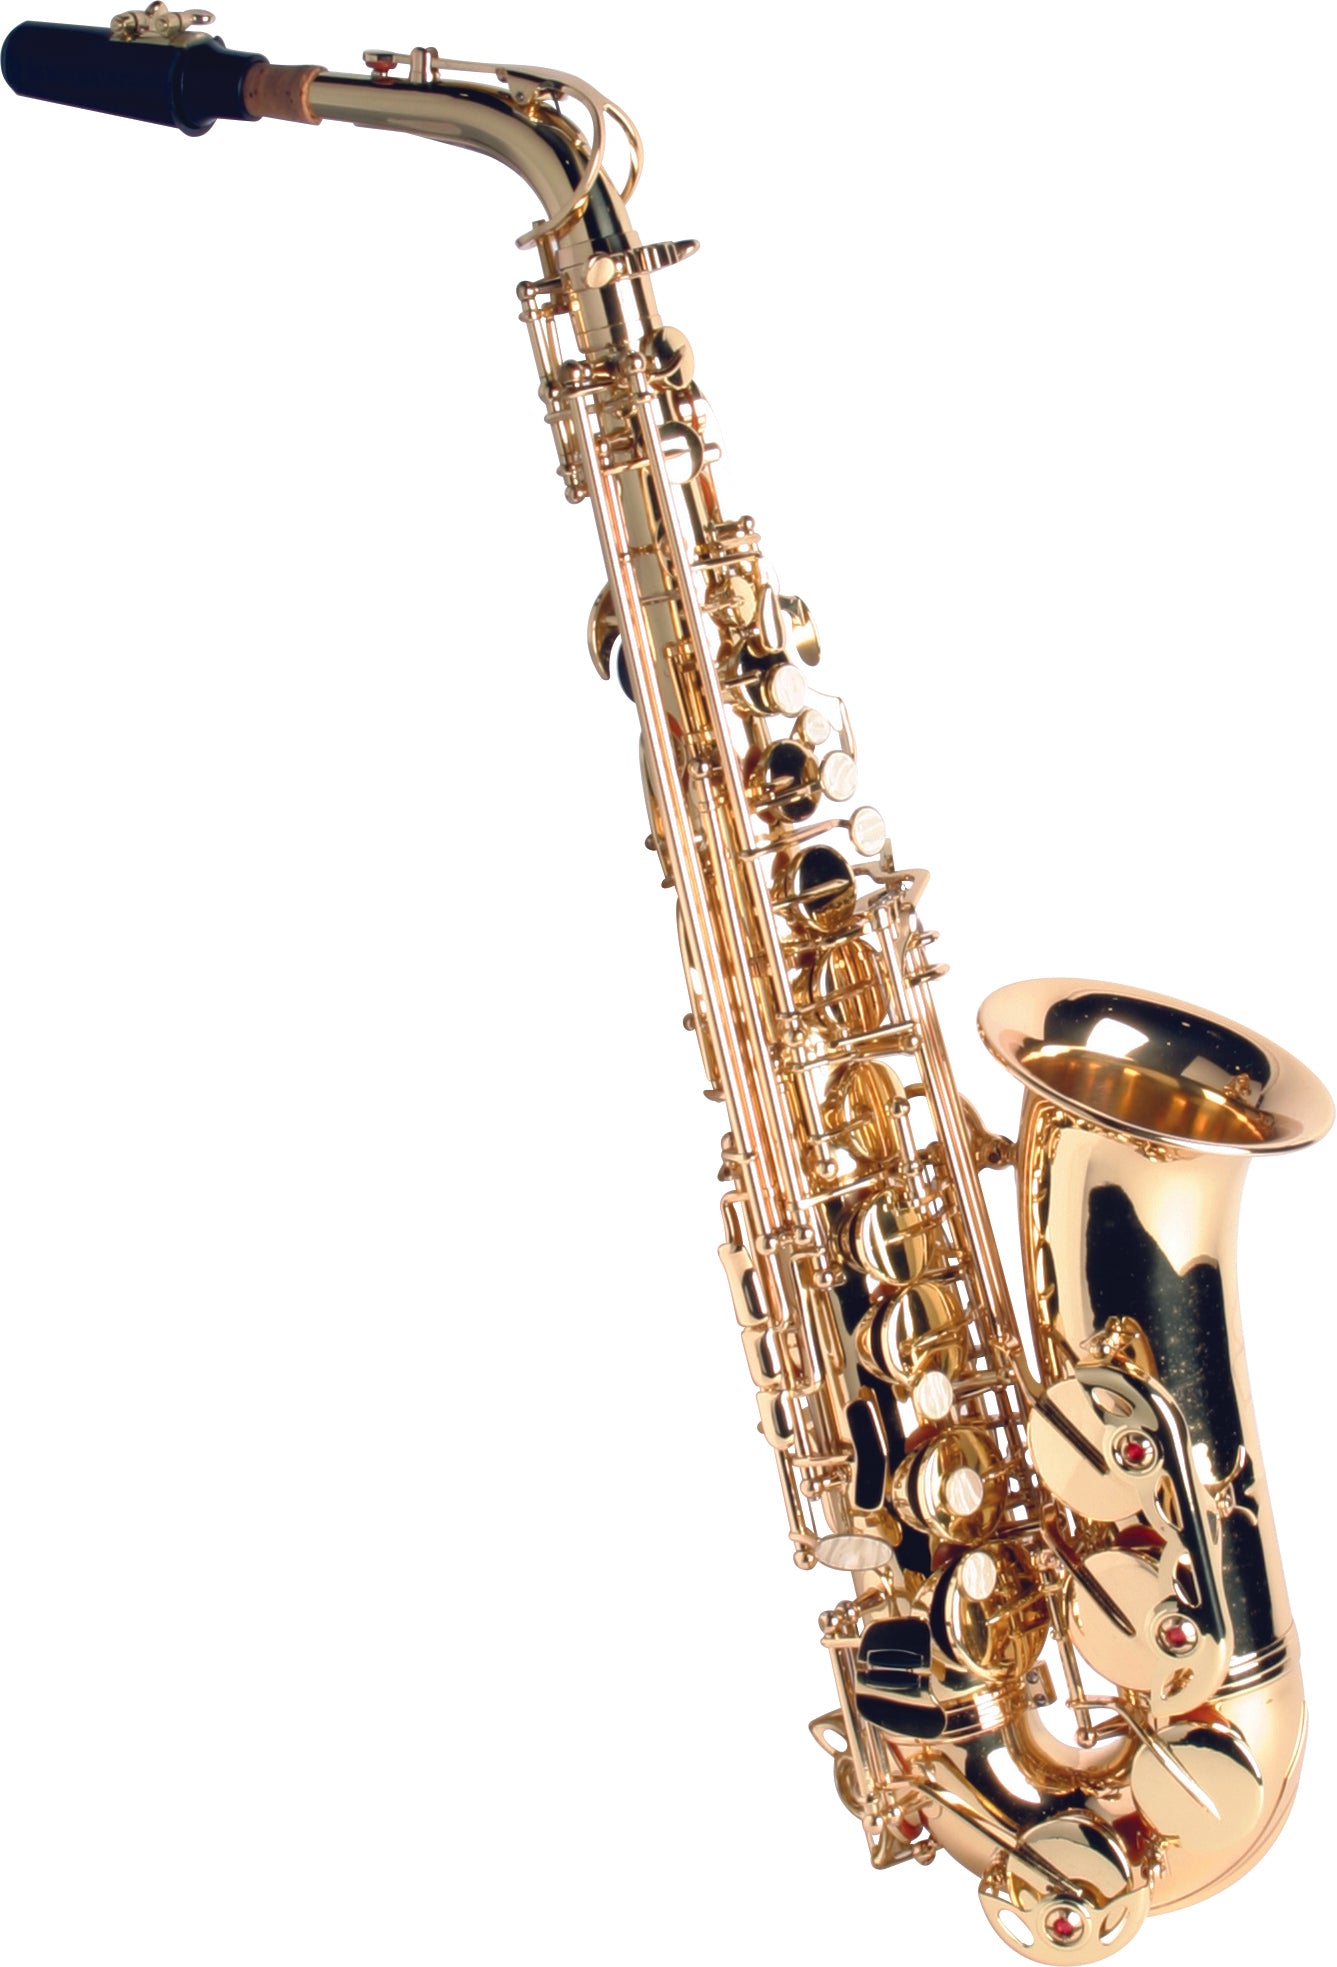 Sinclair Tenor Sax Outfit STS2400 - The Guitar World